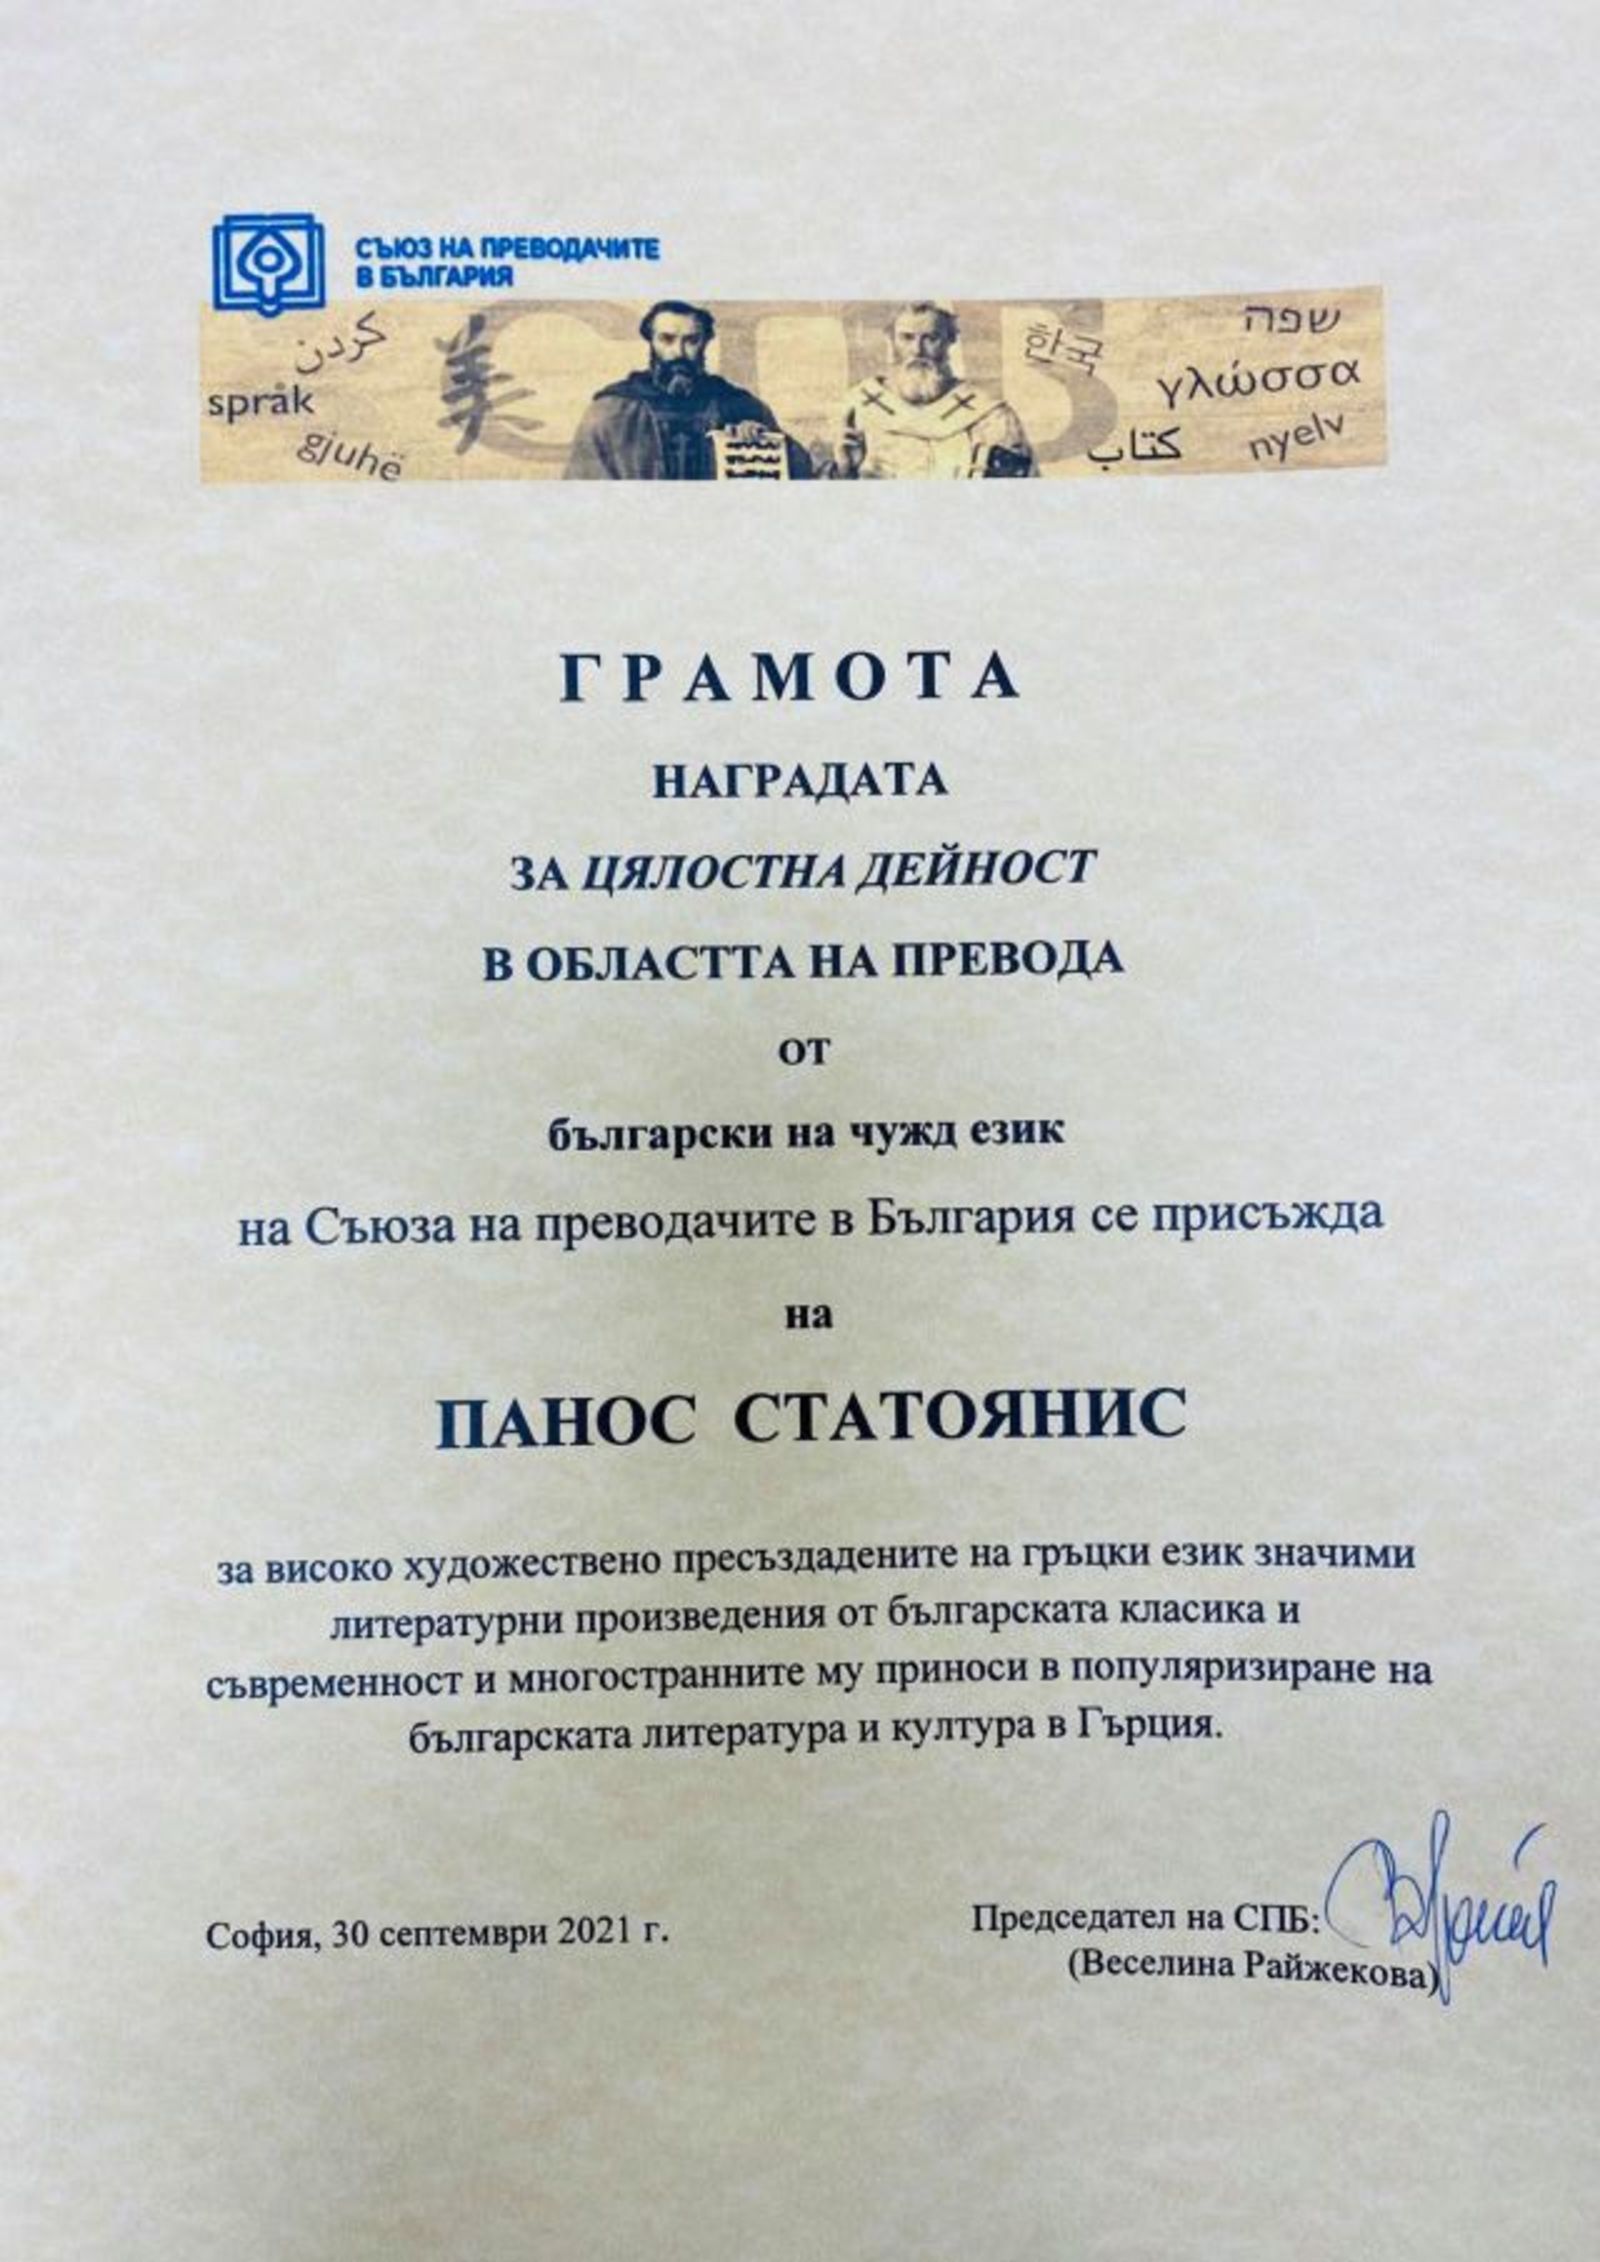 Panos Statoyanis Awarded the Prize of the Union of Translators in Bulgaria for Overall Activity in the Field of Translation from Bulgarian into a Foreign Language